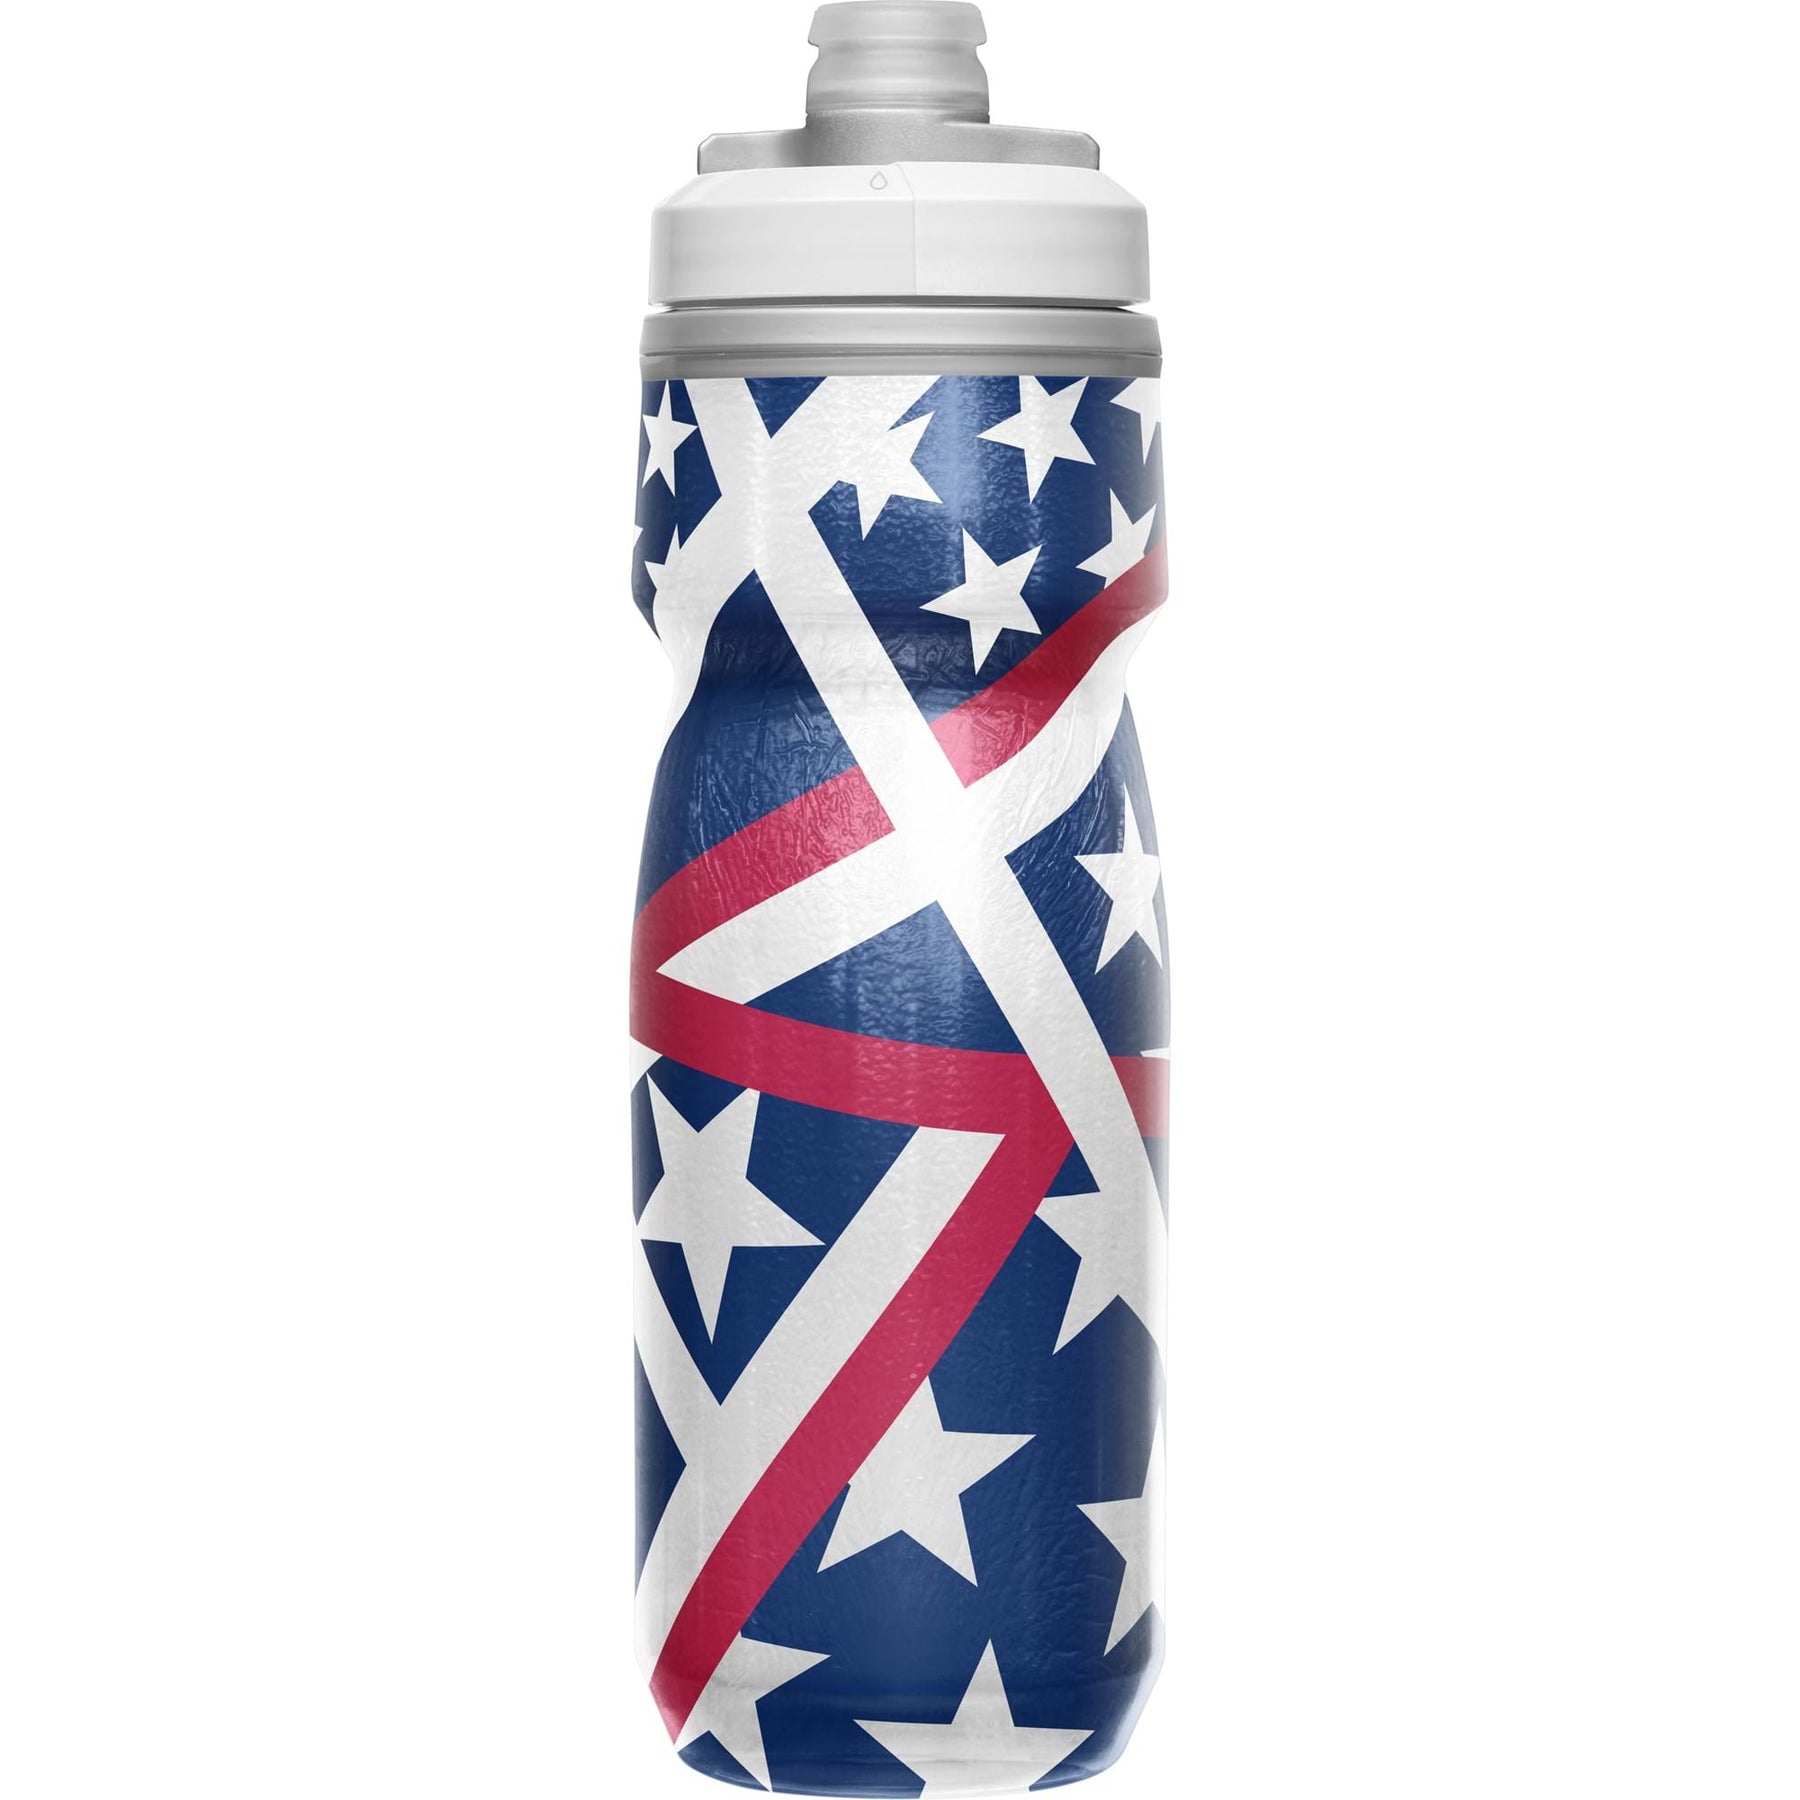 Camelbak Podium Chill Insulated Bottle 600ml (Spring/Summer, Limited Edition)